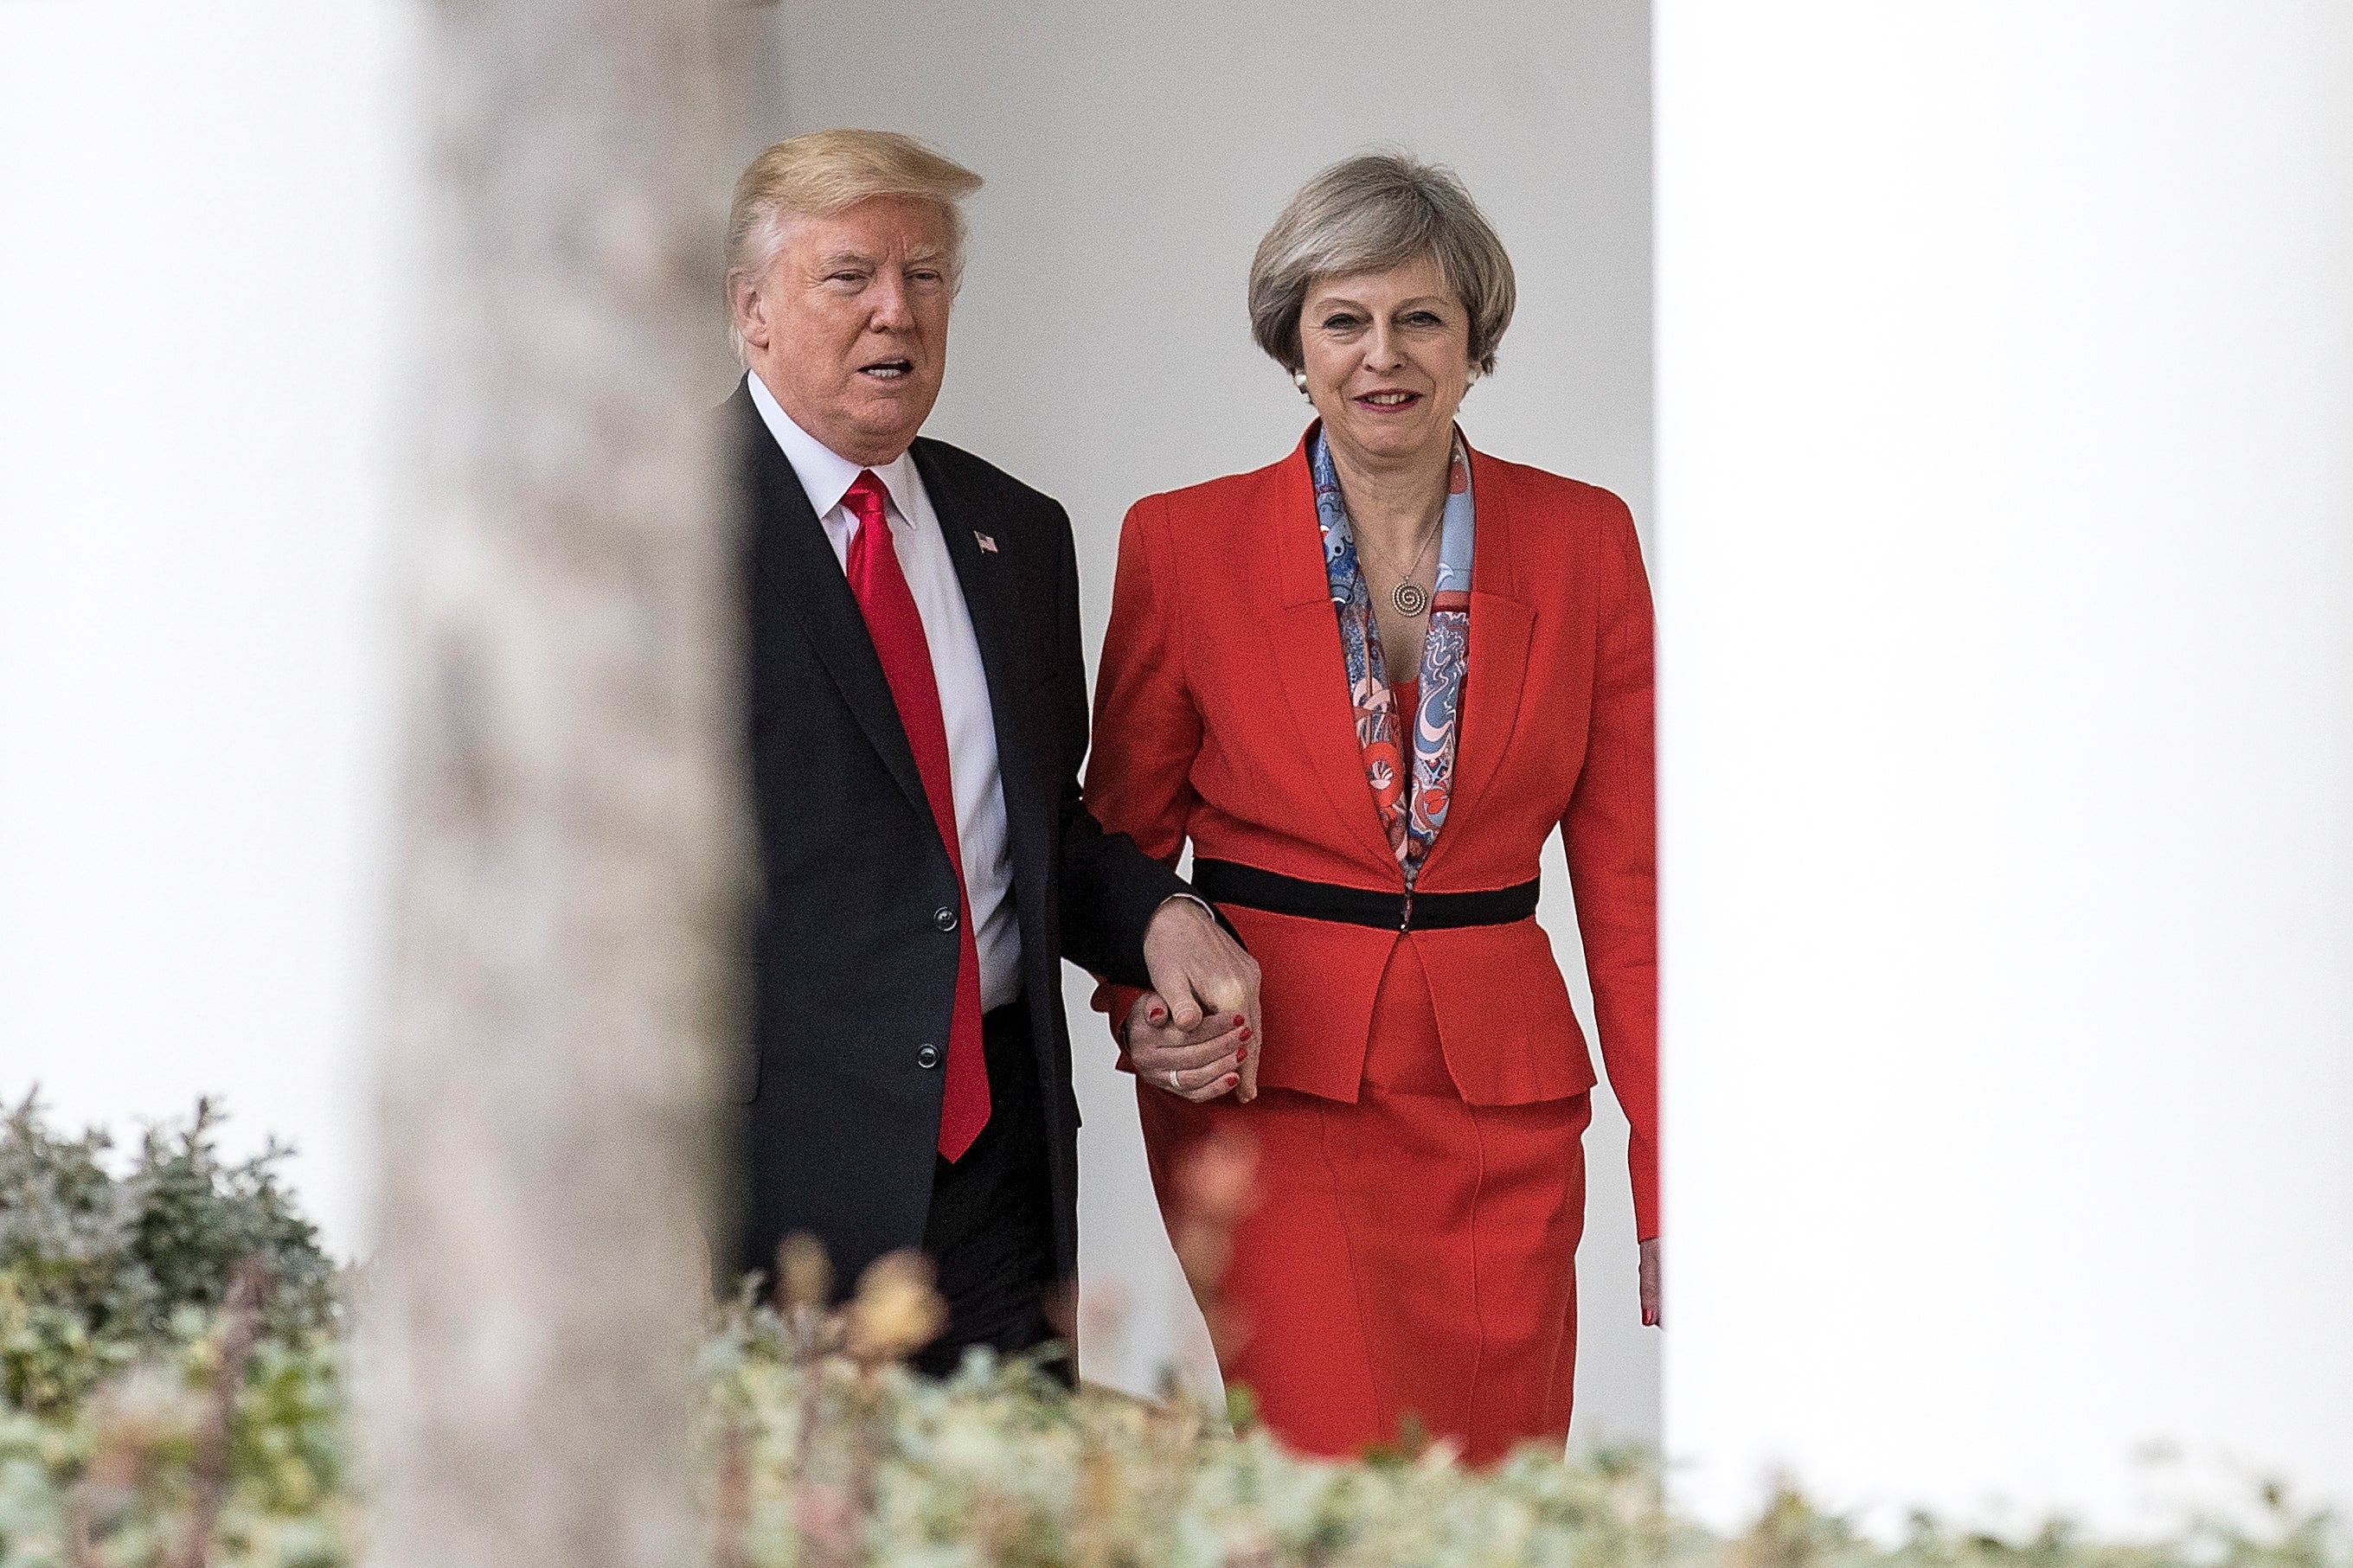 Former Prime Minister Theresa May and former U.S. President Donald Trump walk along The Colonnade of the West Wing at The White House on January 27, 2017